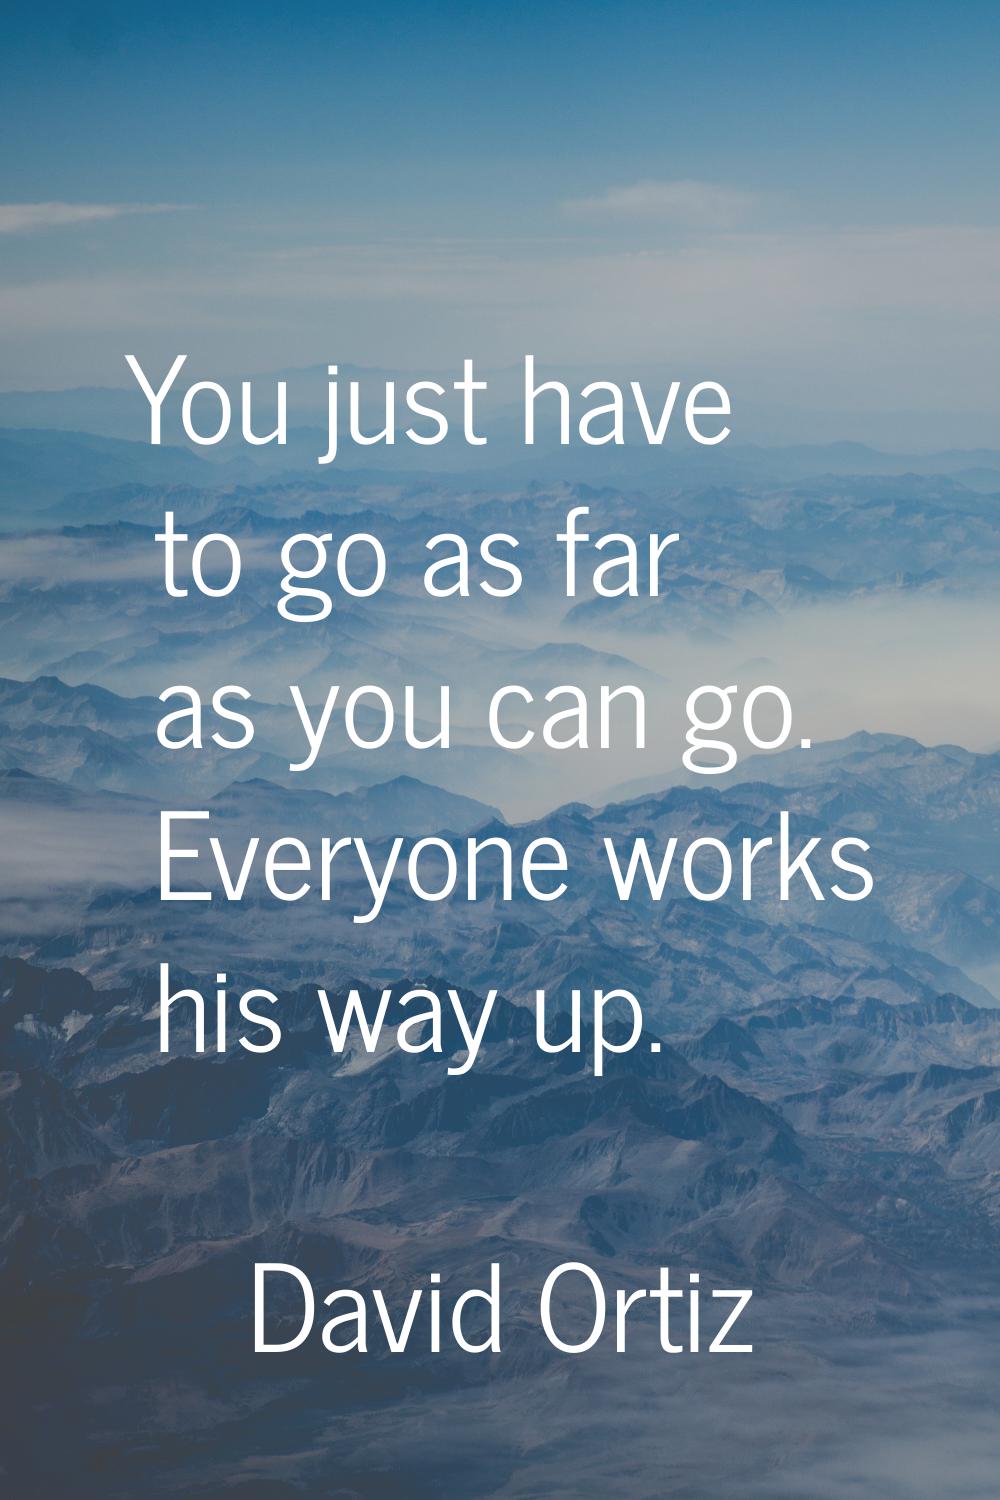 You just have to go as far as you can go. Everyone works his way up.